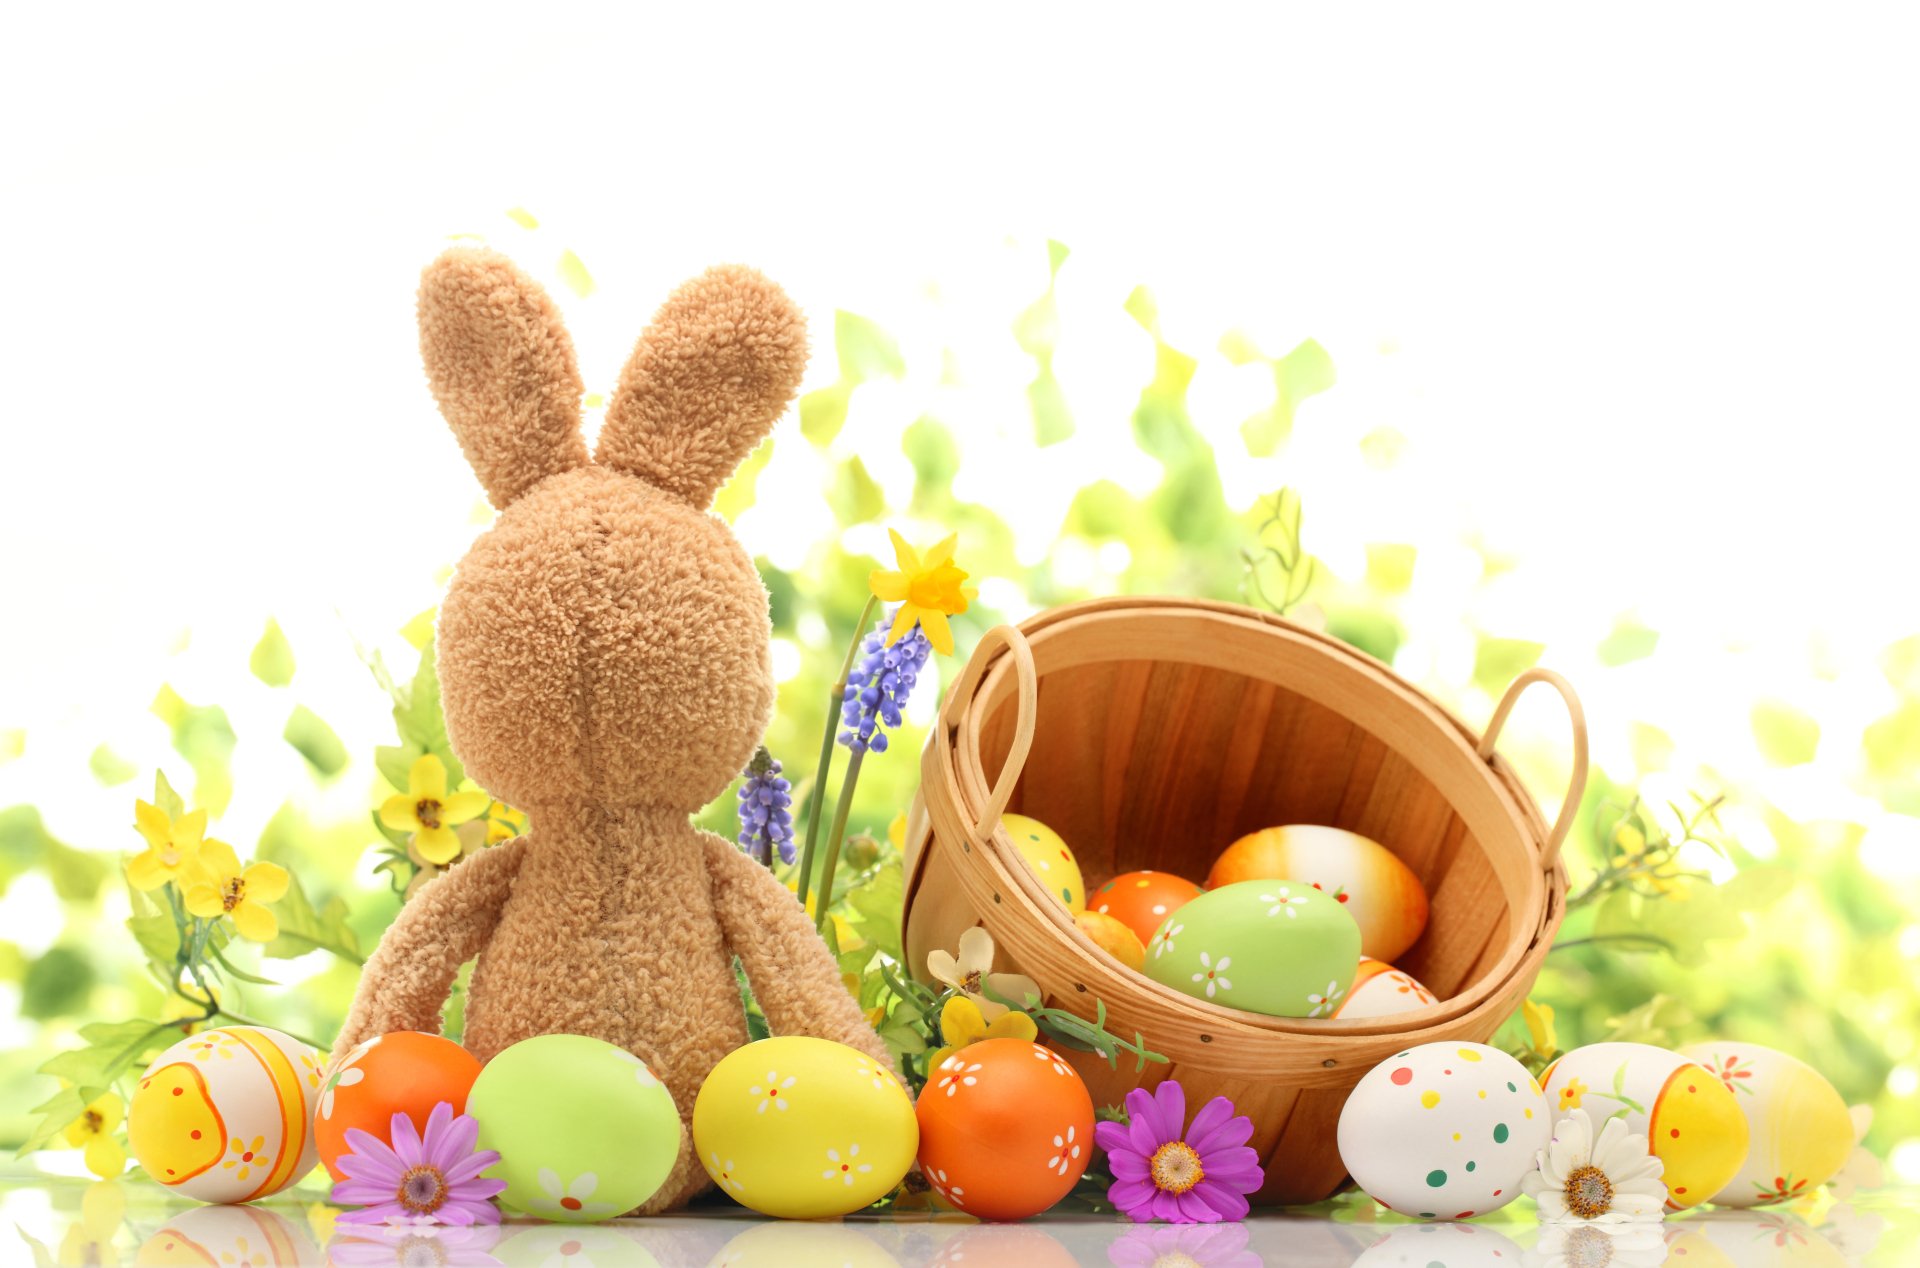 Download Stuffed Animal Flower Bunny Colorful Easter Egg Holiday Easter  4k Ultra HD Wallpaper